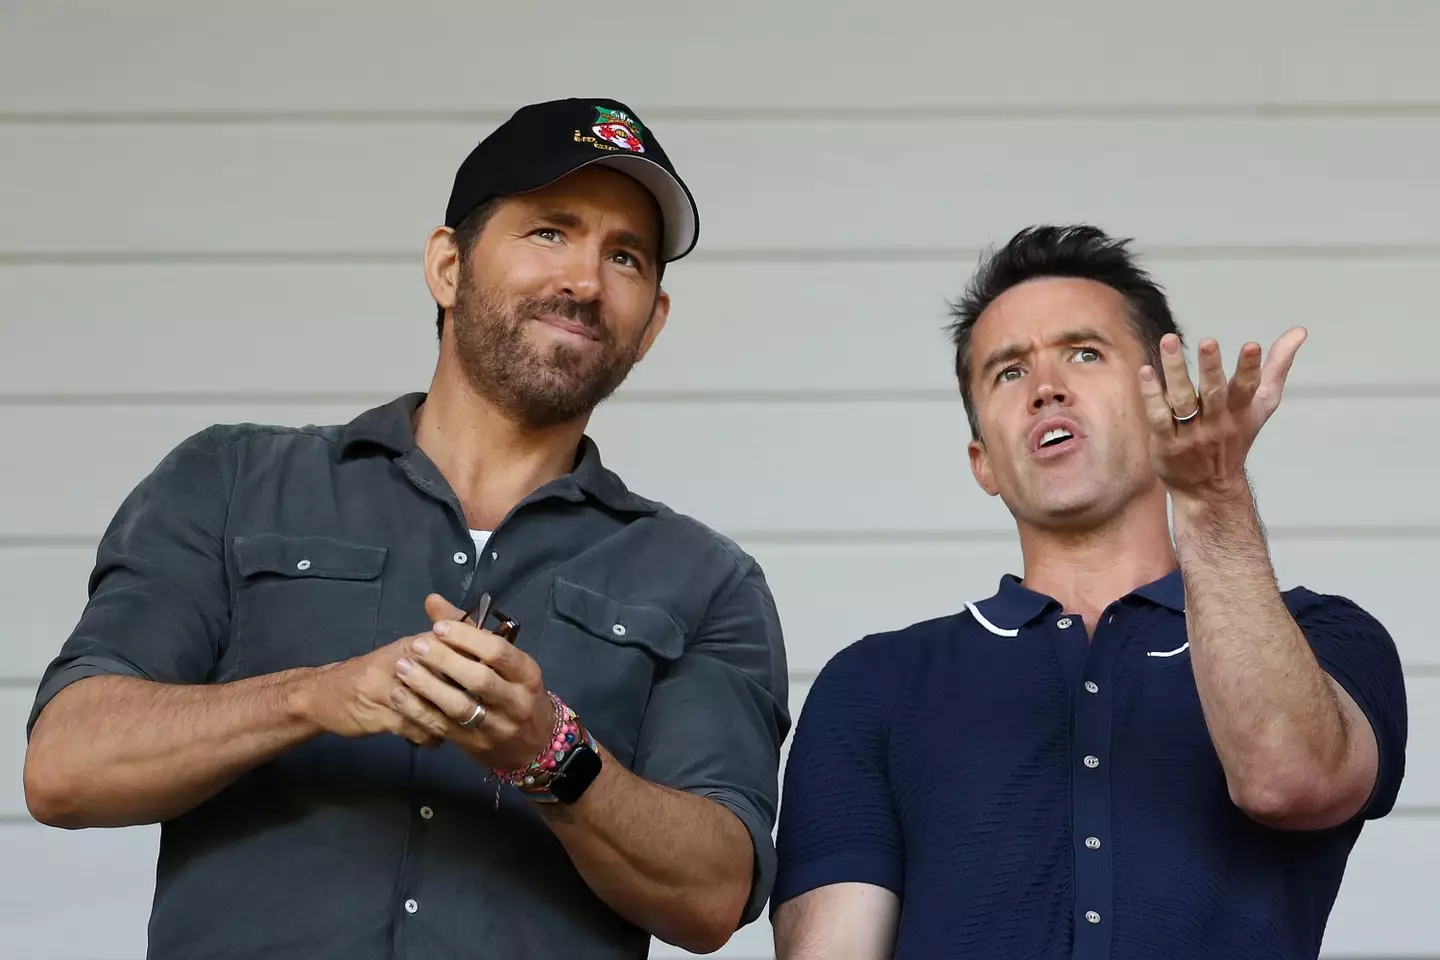 Ryan Reynolds and Rob McElhenney's Wrexham are set to secure back-to-back promotions (Getty)